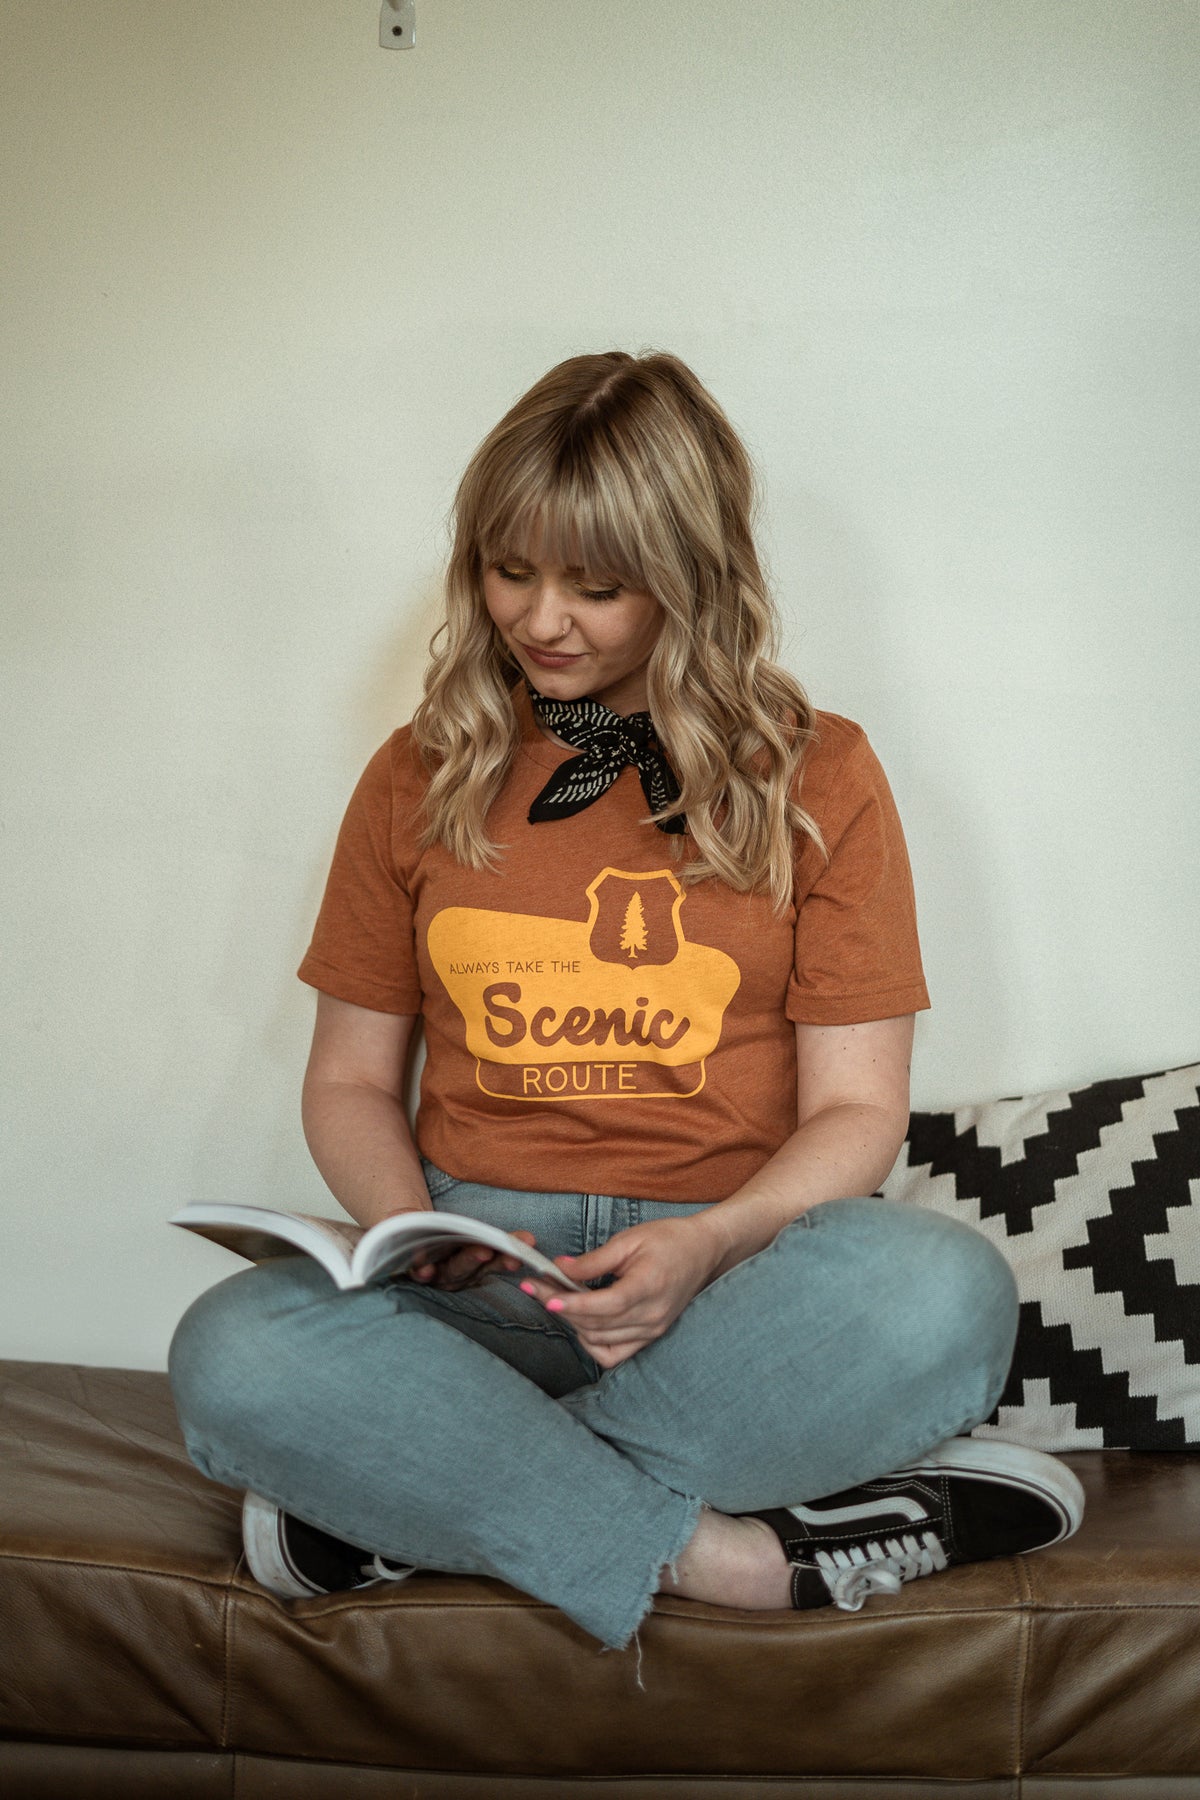 Always Take The Scenic Route T-Shirt